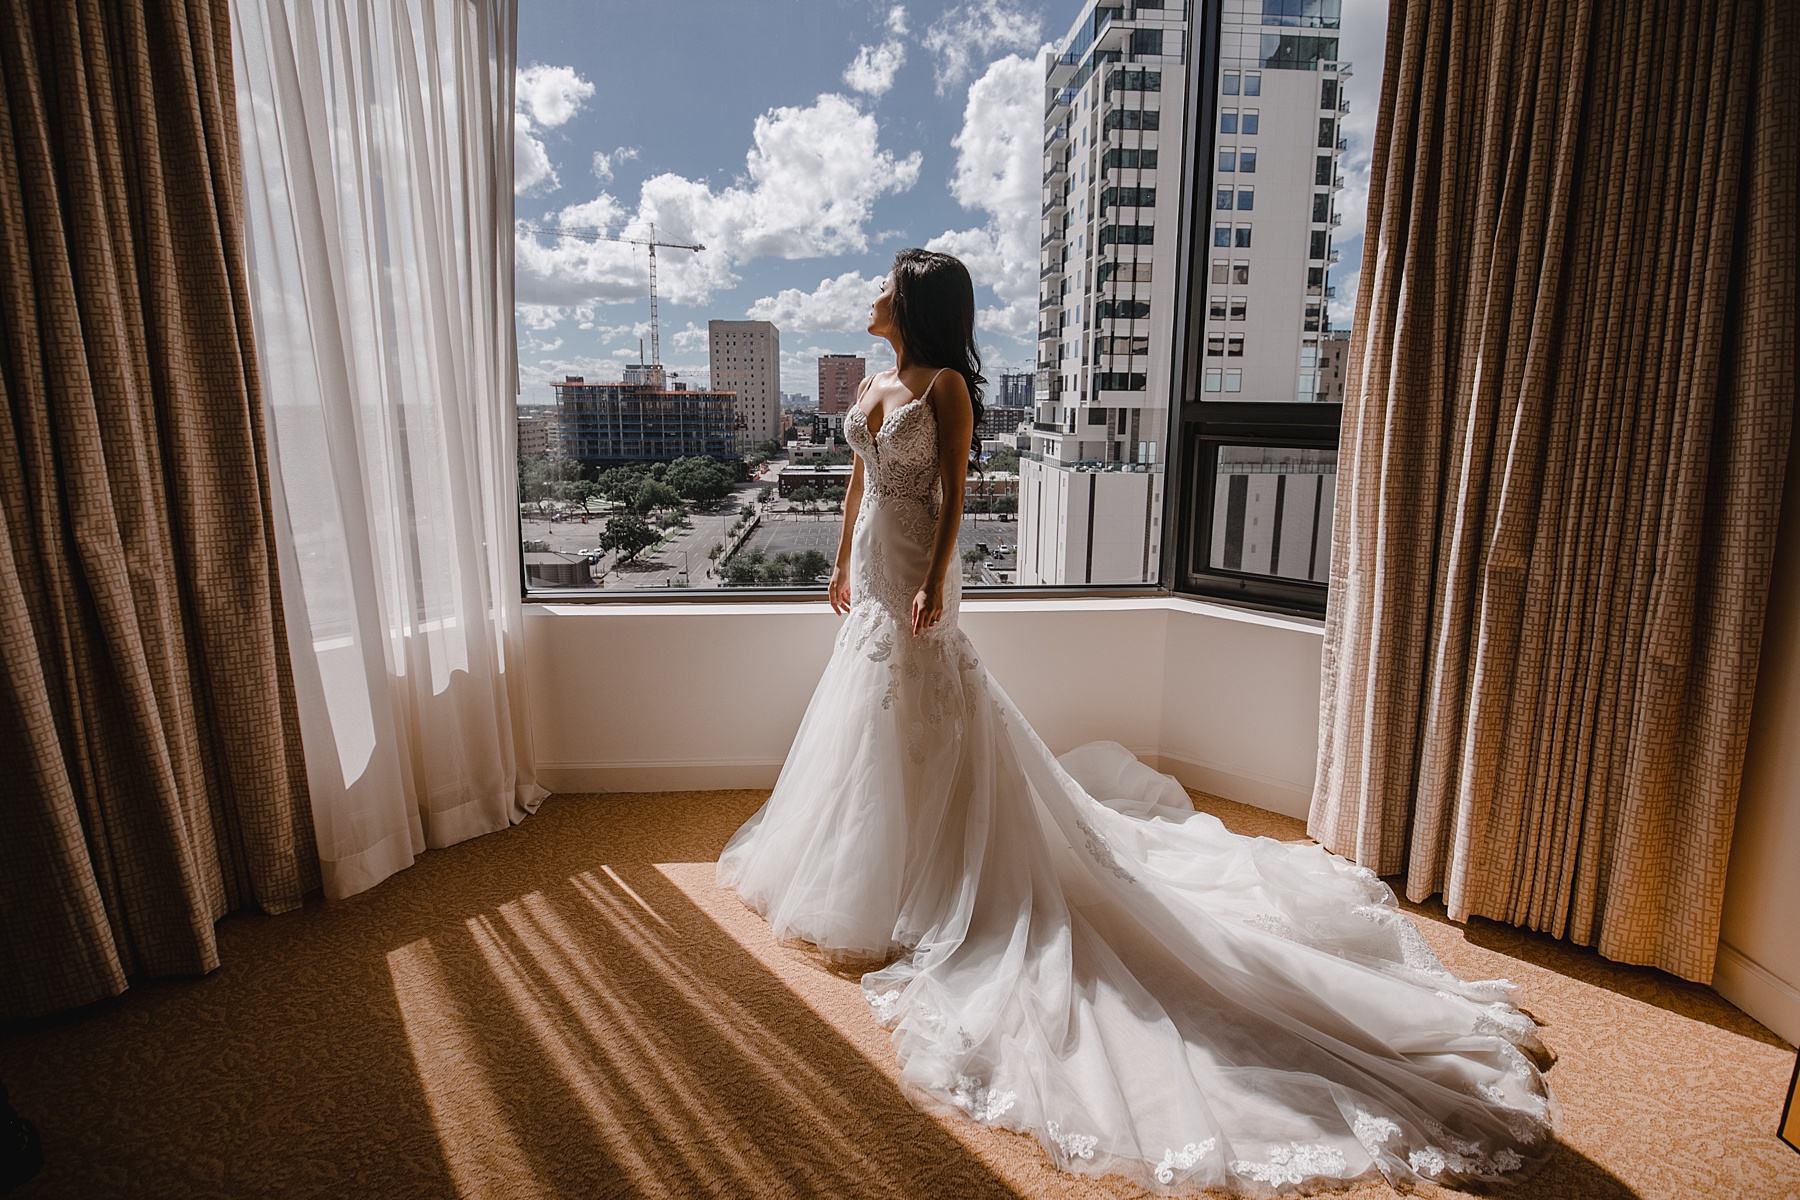 Bide in the window of her Four Seasons hotel room before her wedding reception